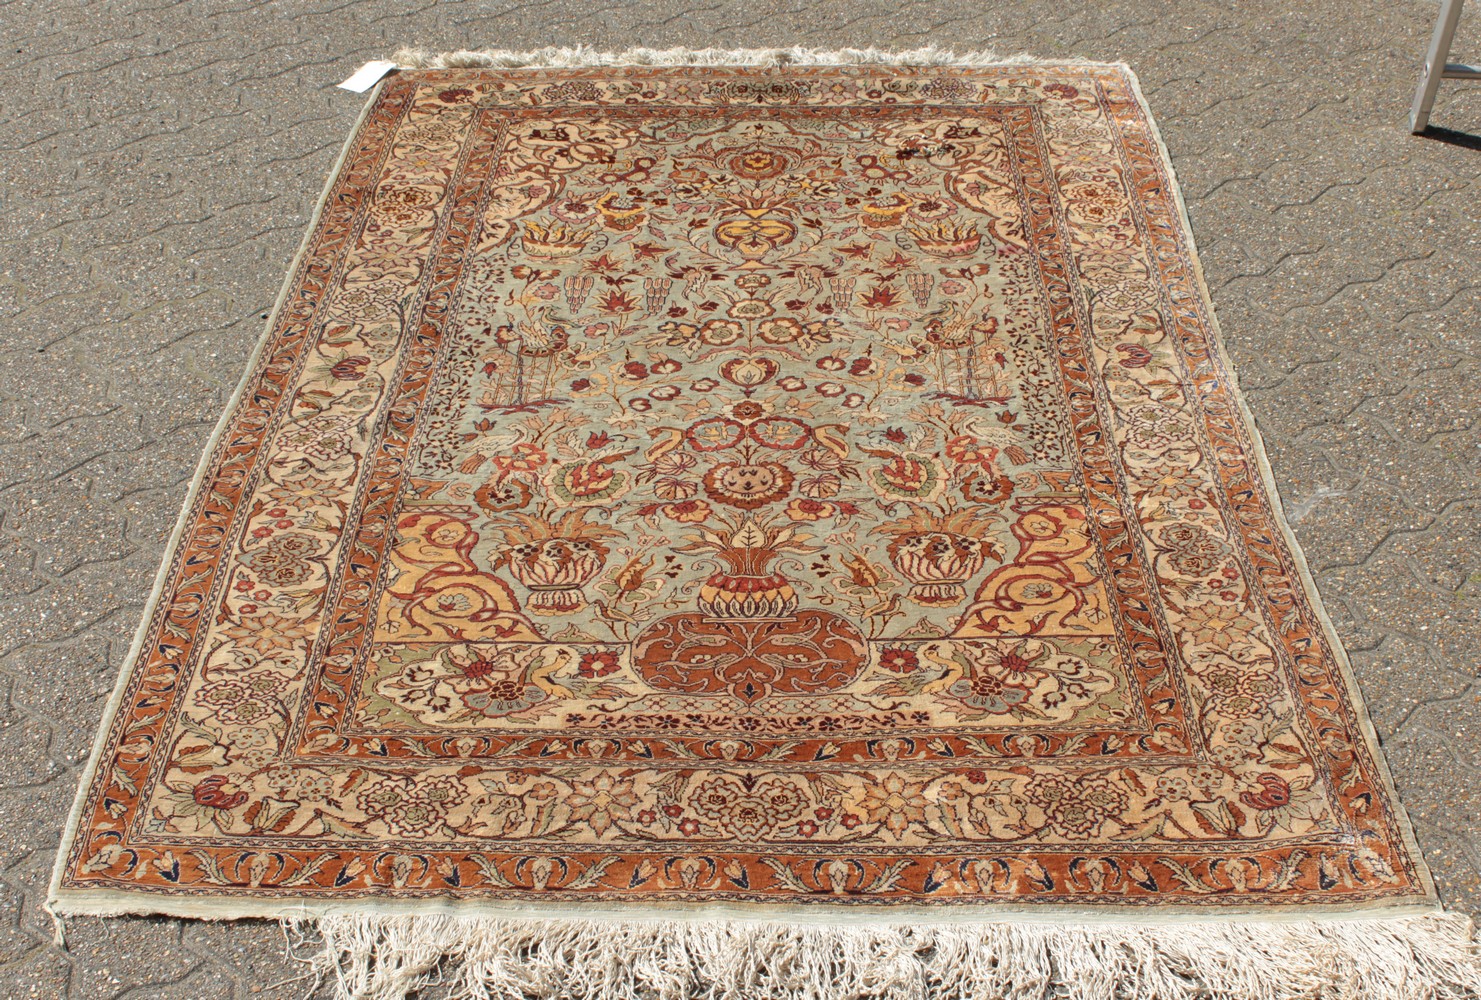 A FINE TURKISH SILK RUG with allover pattern of birds and flowers. 6ft 10ins x 4ft 3ins. - Image 16 of 17